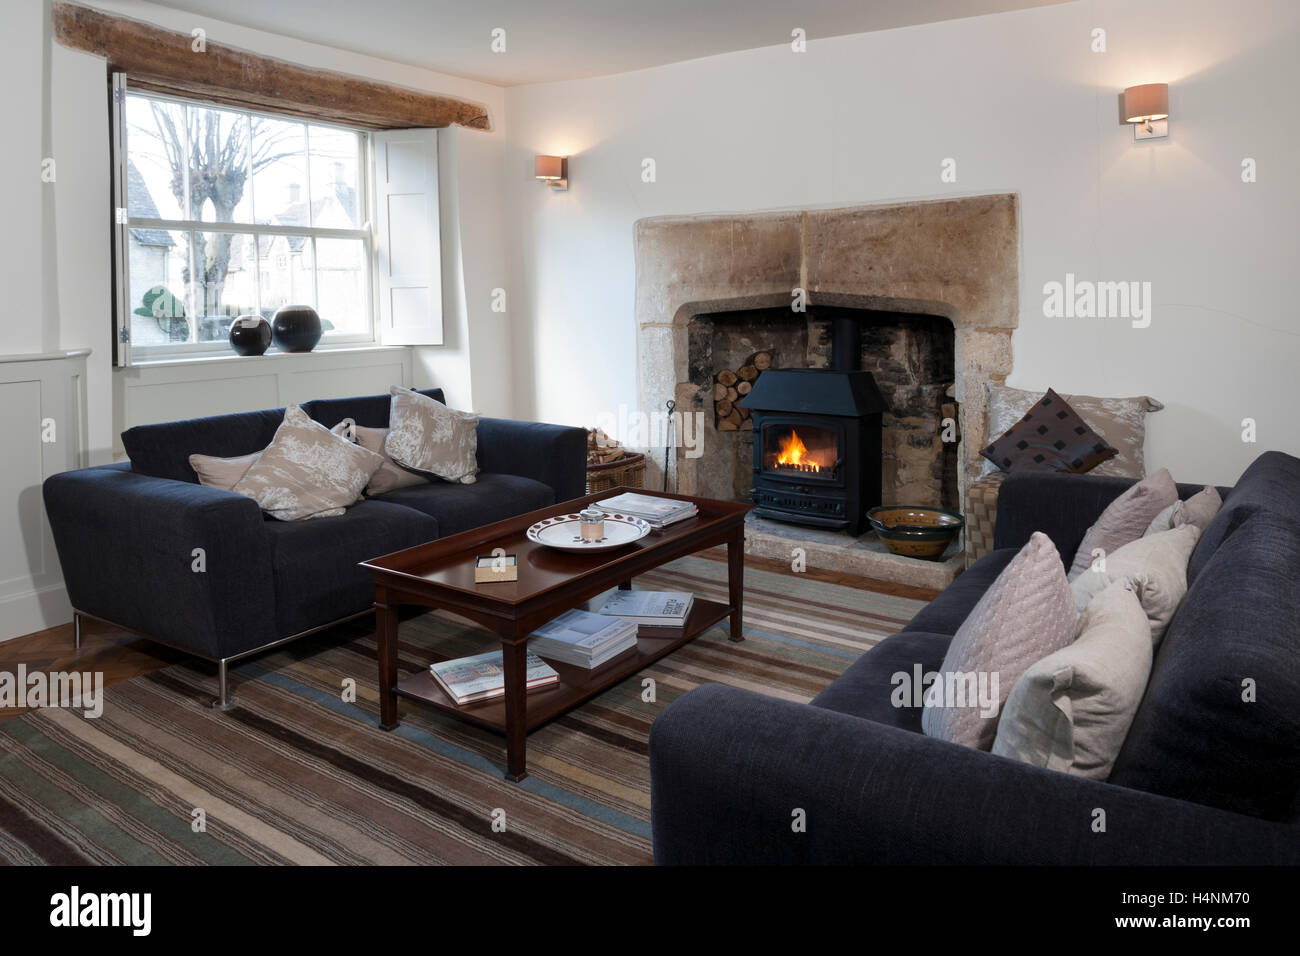 A simply firnished living room with a period fireplace feature and a log burning stove Stock Photo